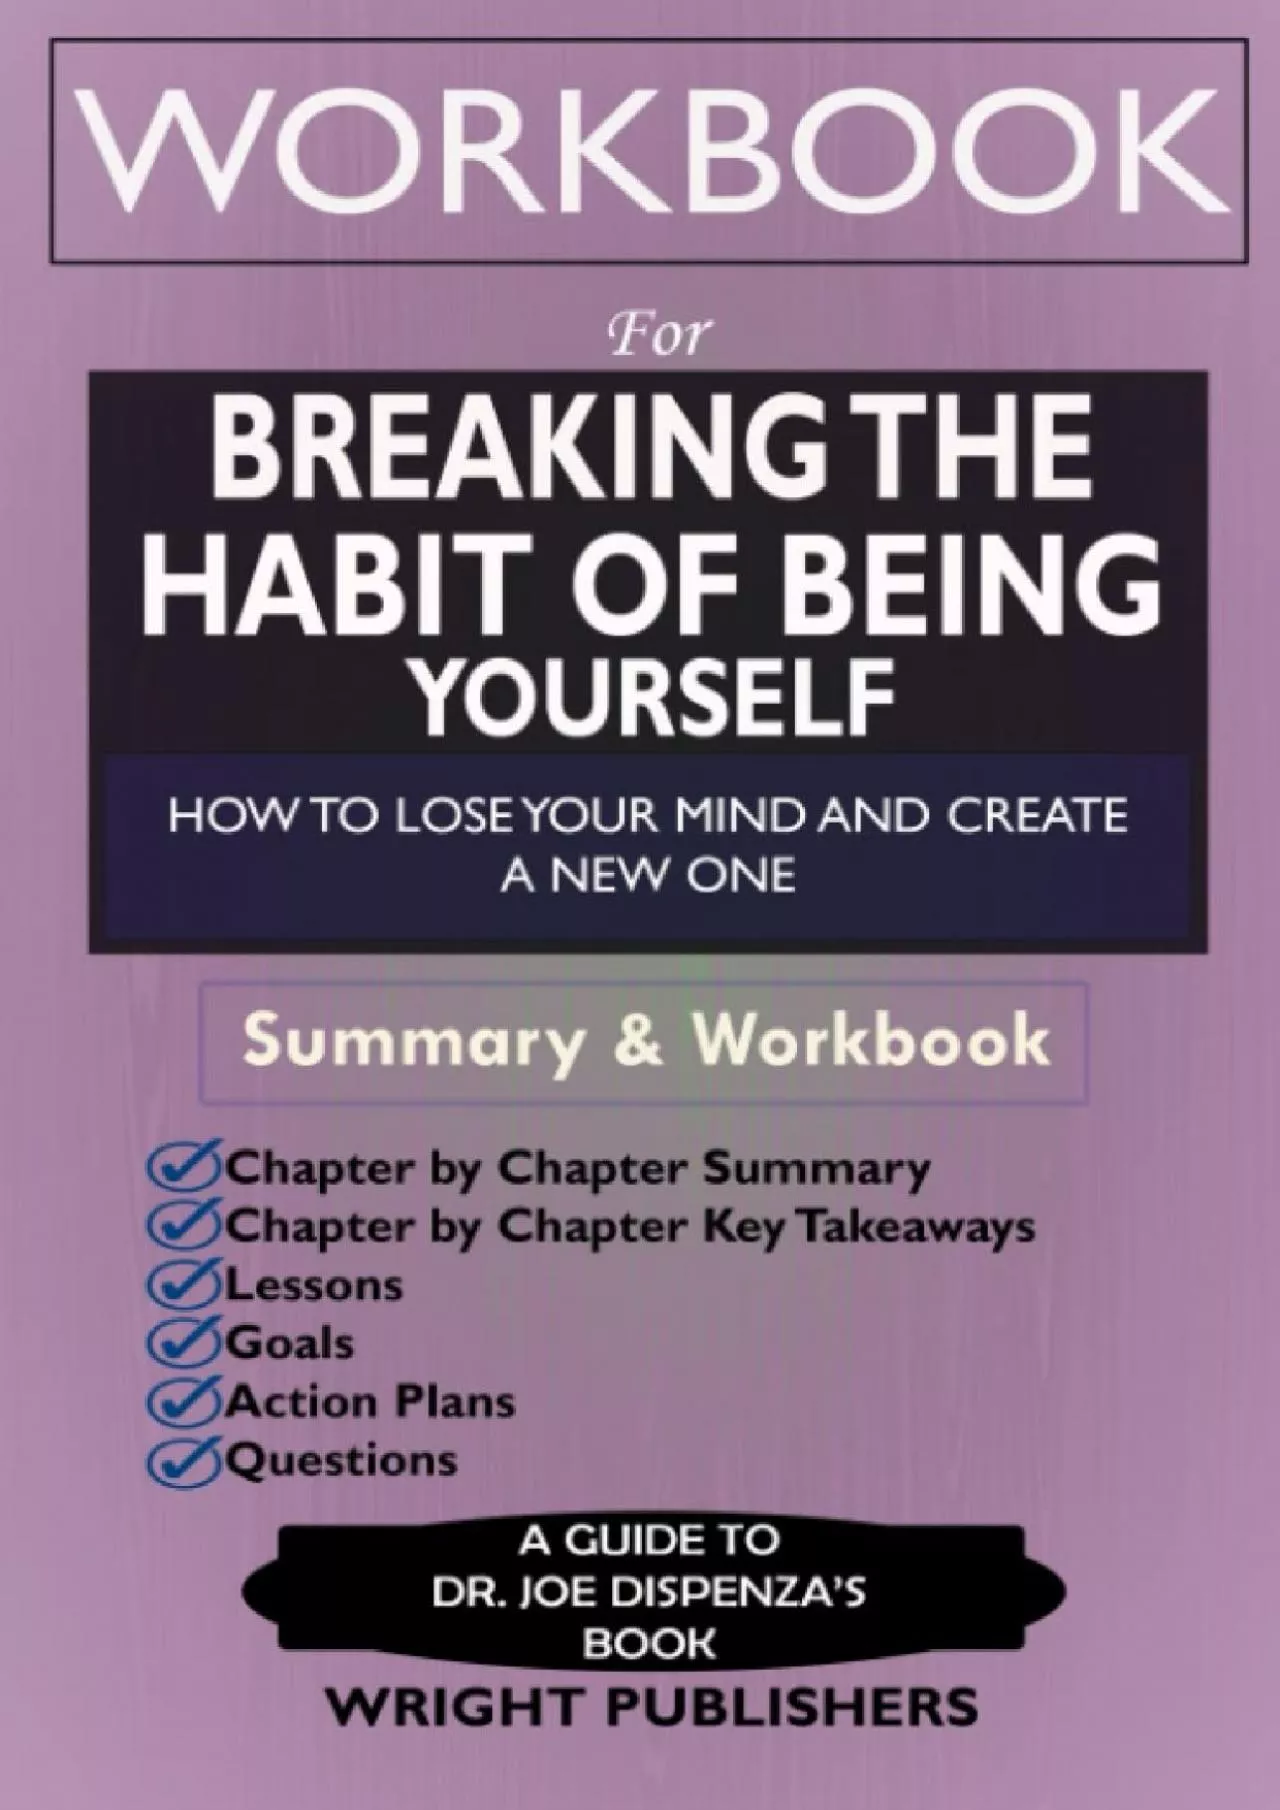 [DOWNLOAD] Workbook For Breaking The Habit of Being Yourself: How to Lose Your Mind and